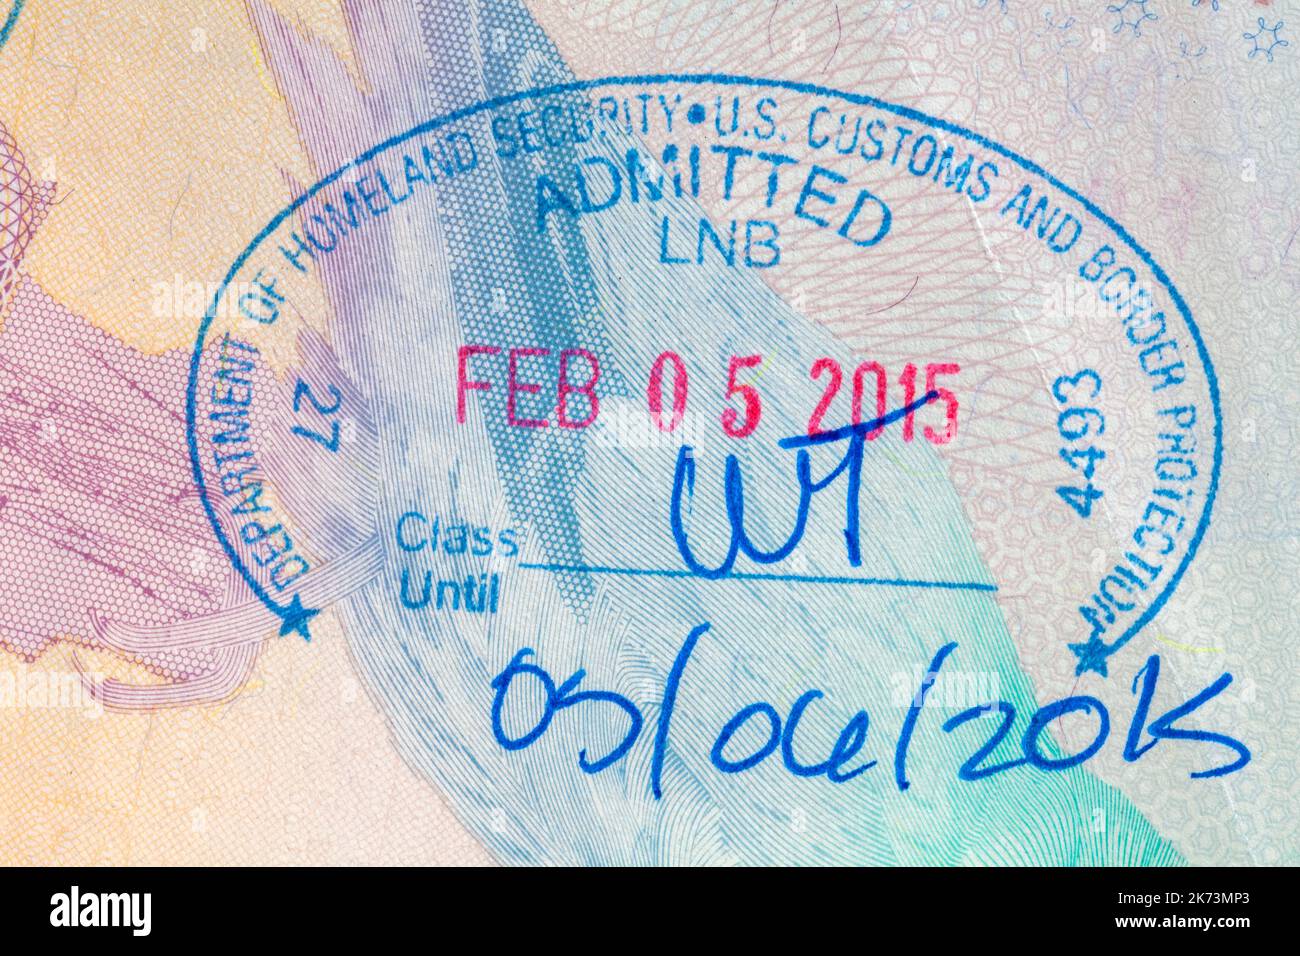 Department of Homeland Security US Customs and Border Protection Admitted LNB Long Beach, CA - stamp in British passport Feb 05 2015 Stock Photo